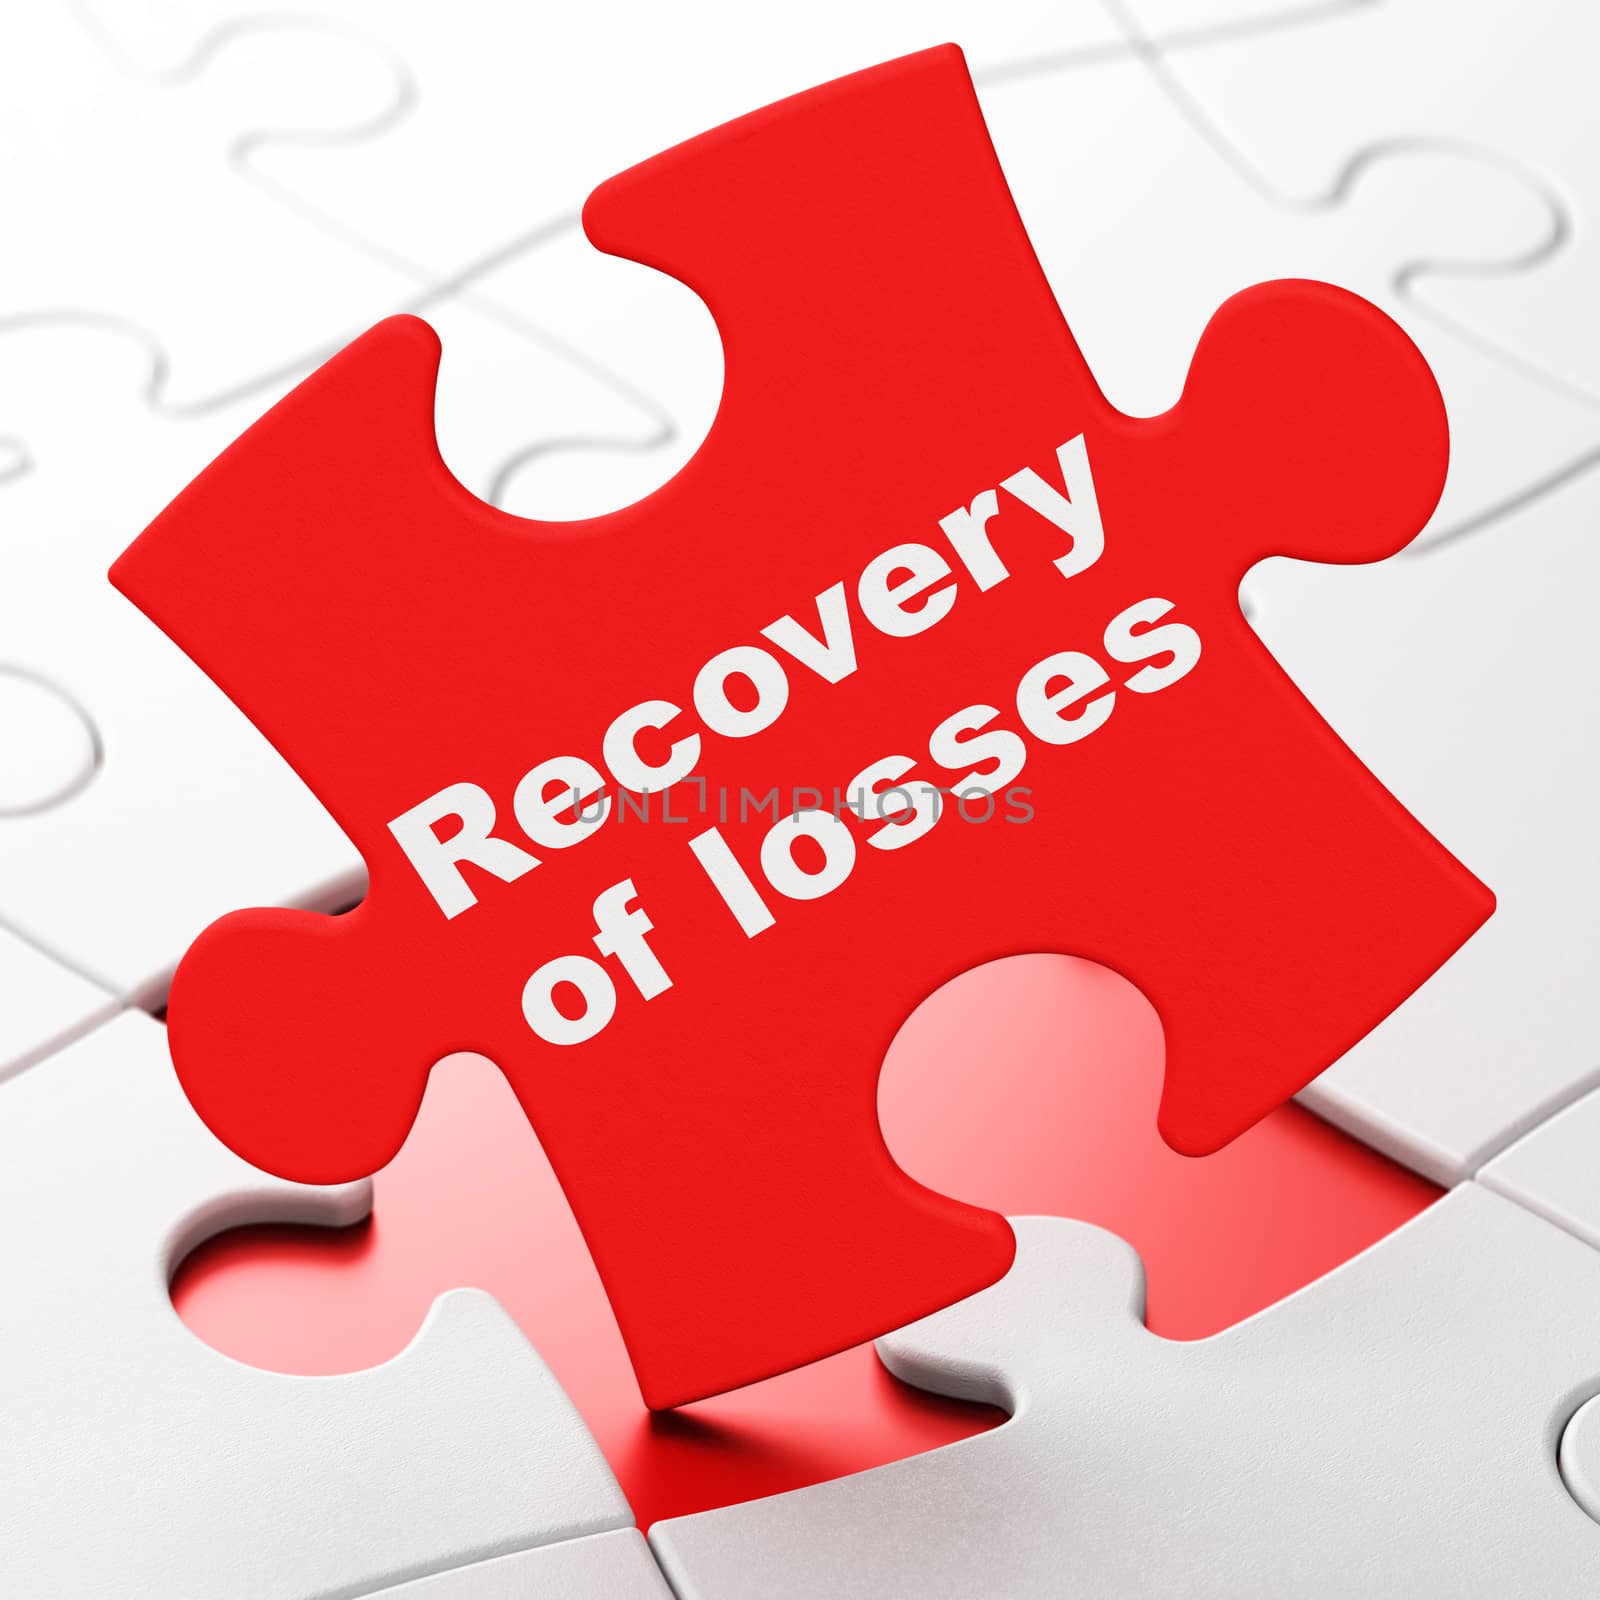 Money concept: Recovery Of losses on Red puzzle pieces background, 3D rendering